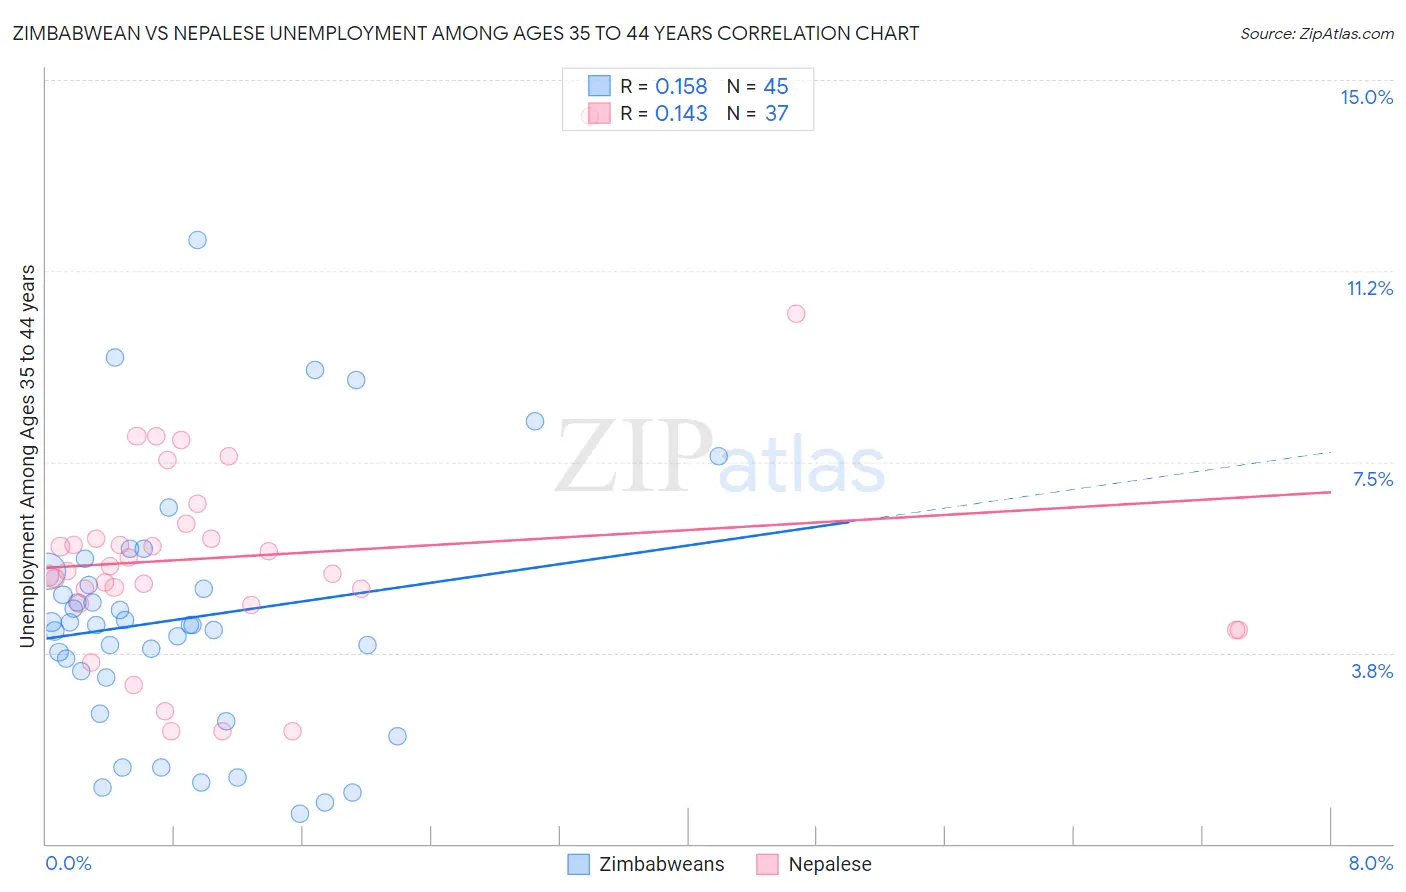 Zimbabwean vs Nepalese Unemployment Among Ages 35 to 44 years